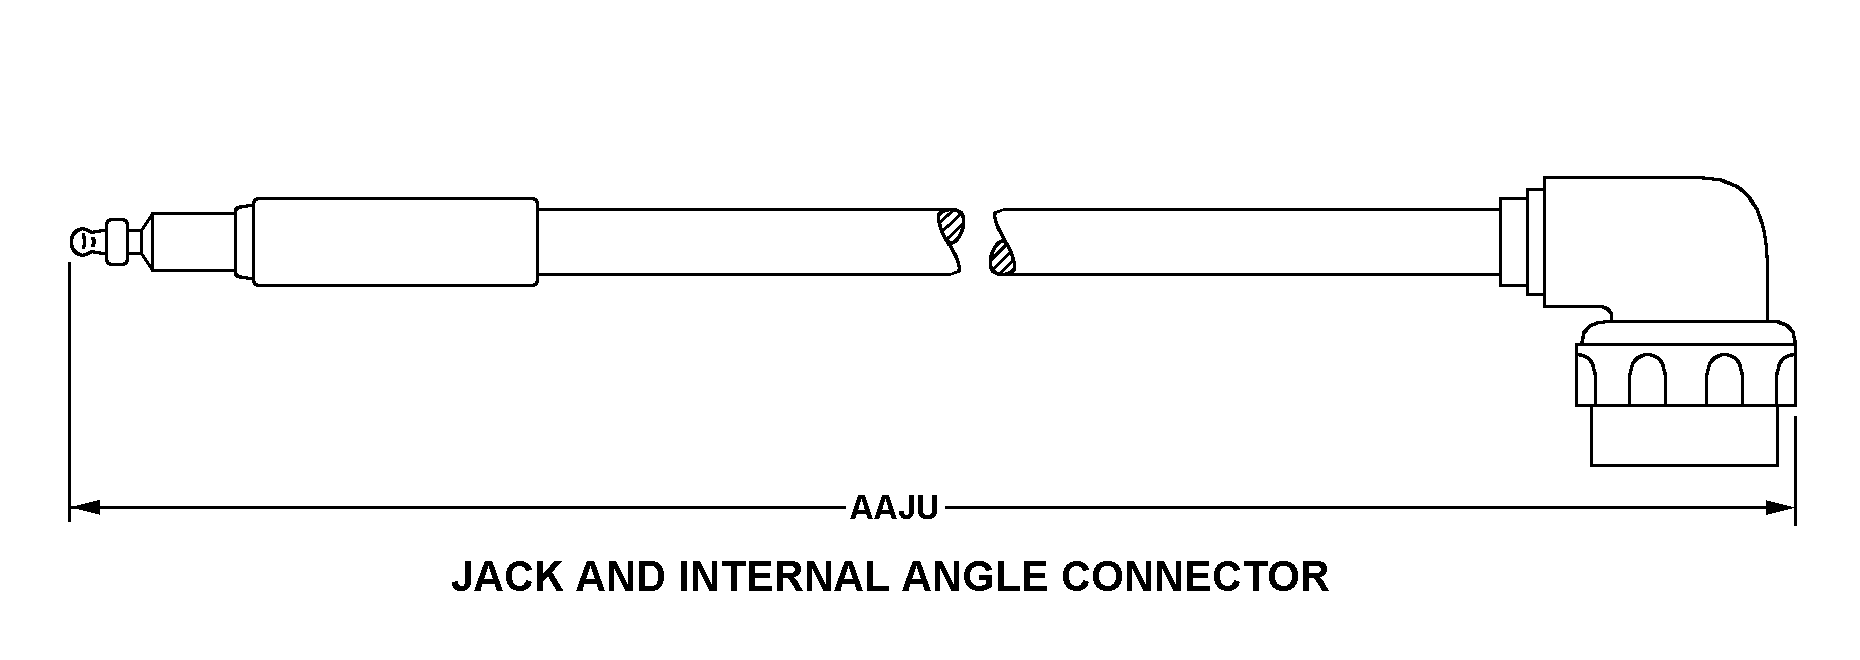 JACK AND INTERNAL ANGLE CONNECTOR style nsn 6150-01-005-7274